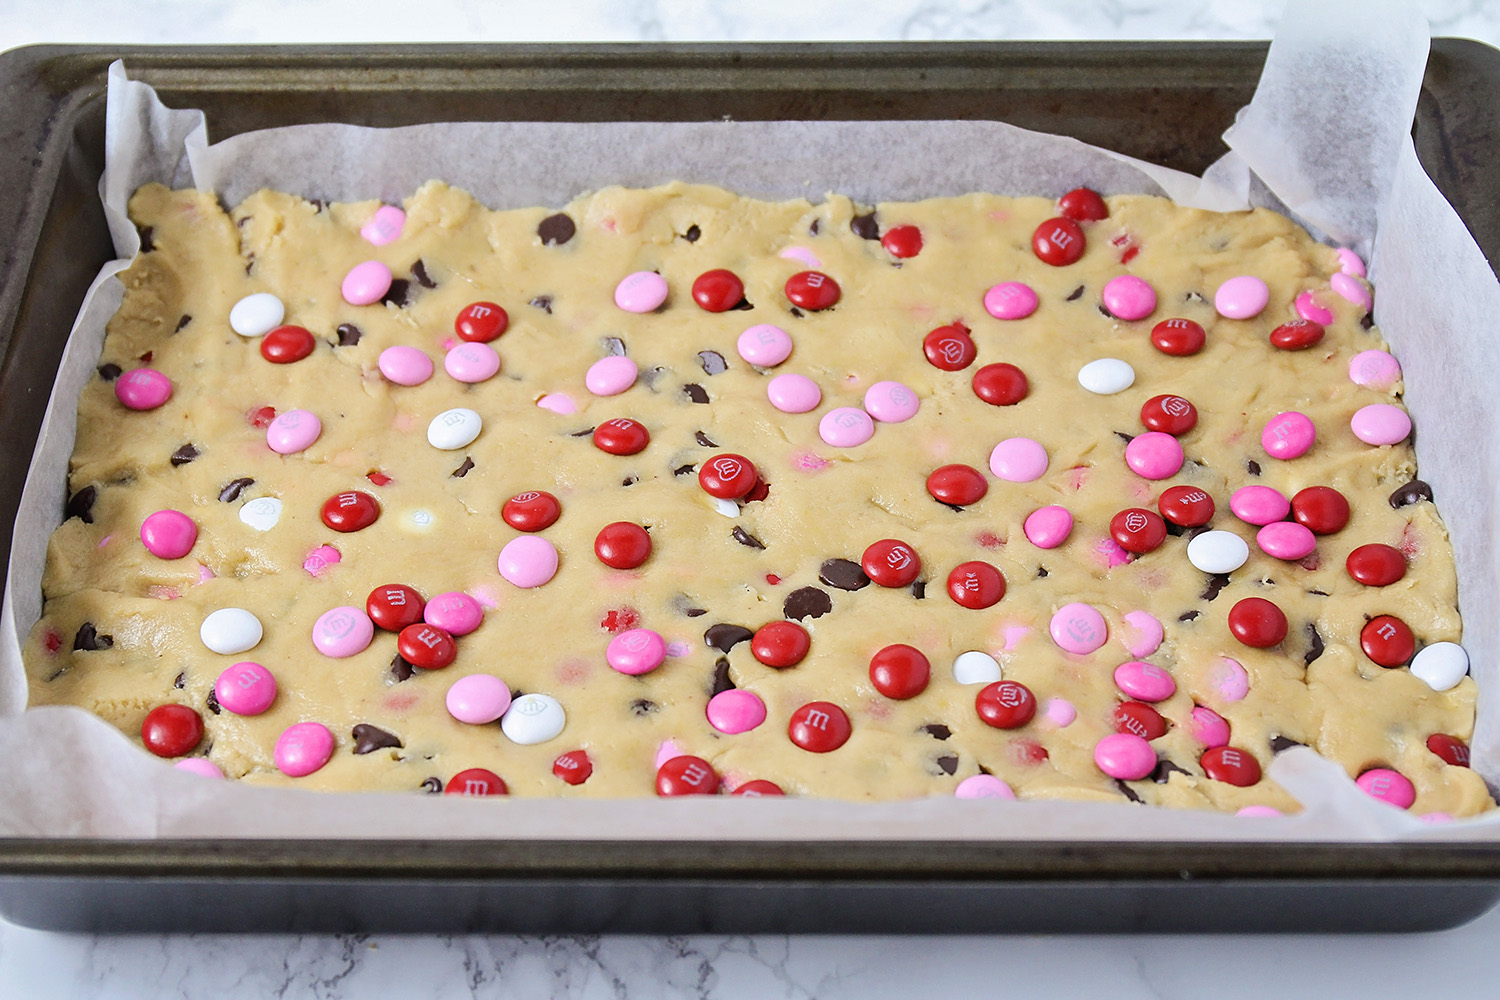 These adorable Valentine cookie bars are loaded with chocolate chips and M&M's. They're the perfect treat for your sweetheart!